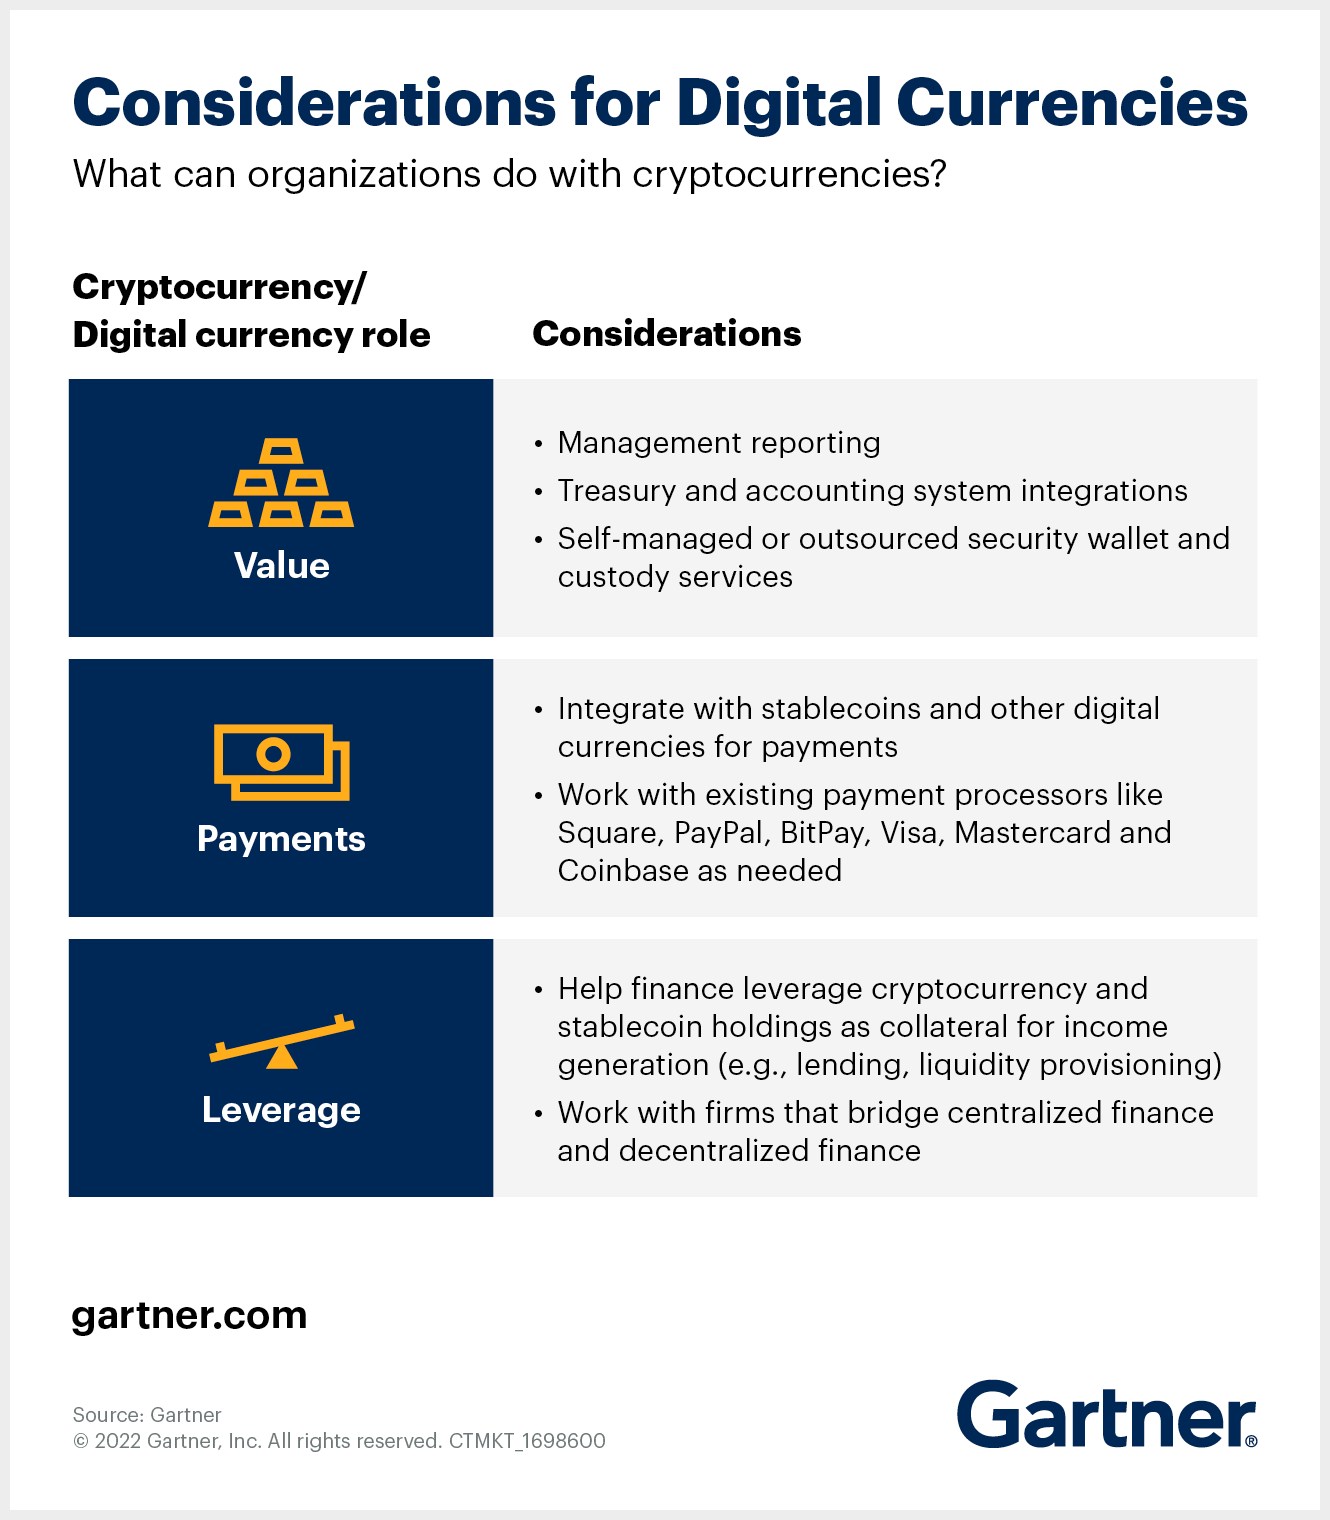 Digital currency and cryptocurrency use cases and considerations